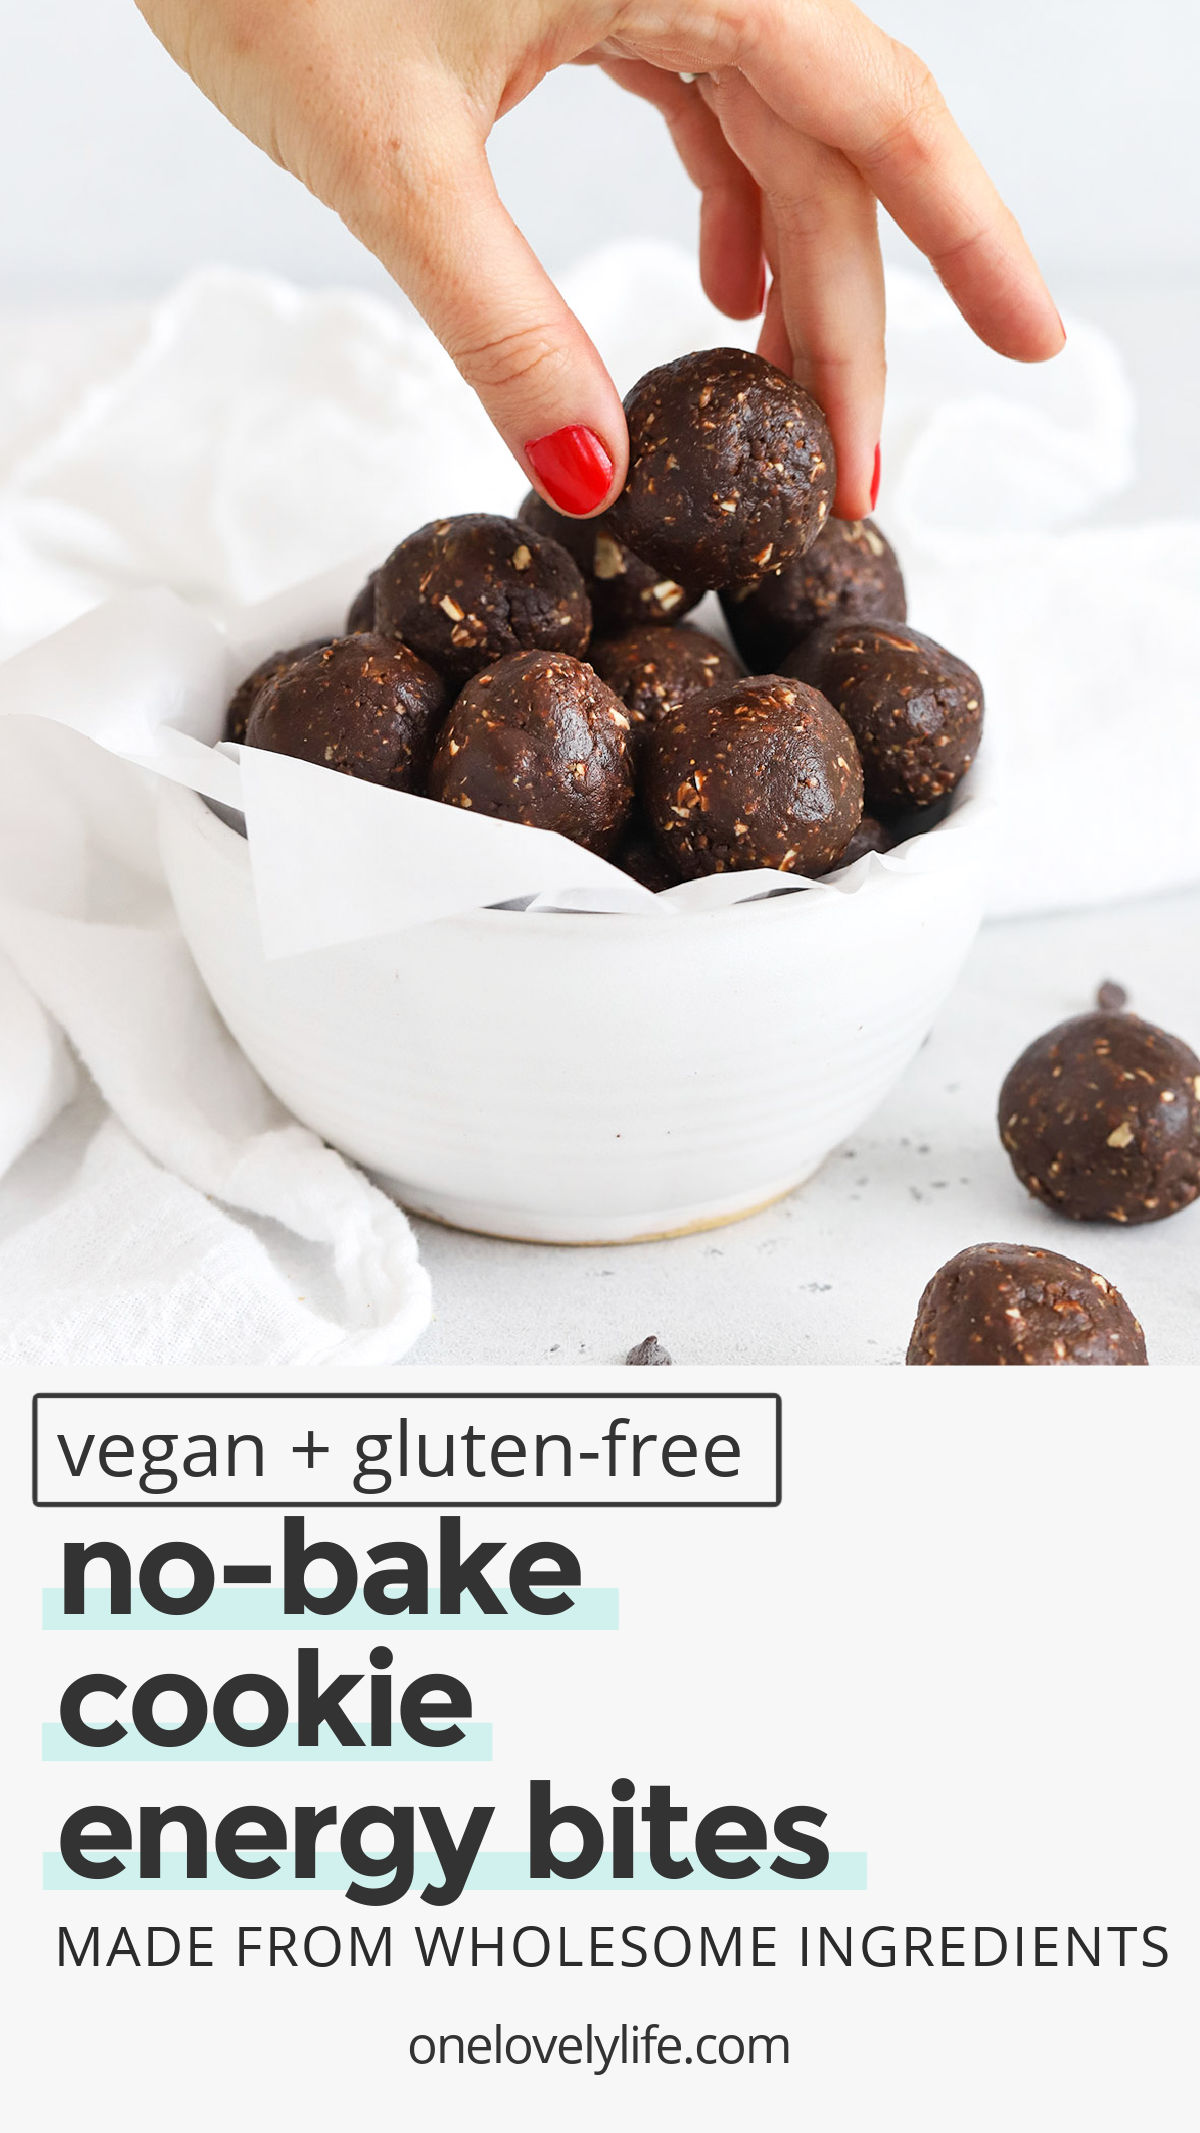 No Bake Cookie Energy Bites - The perfect snack when you're craving something sweet. These chocolate peanut butter energy bites are gluten free, vegan and taste like a cookie! // chocolate peanut butter energy balls // cookie dough energy bites // chocolate coconut energy bites // vegan energy bites // healthy snack ideas // kid friendly snack // healthy snacks for kids // meal prep snack // meal prep treat // healthy treat // healthy dessert